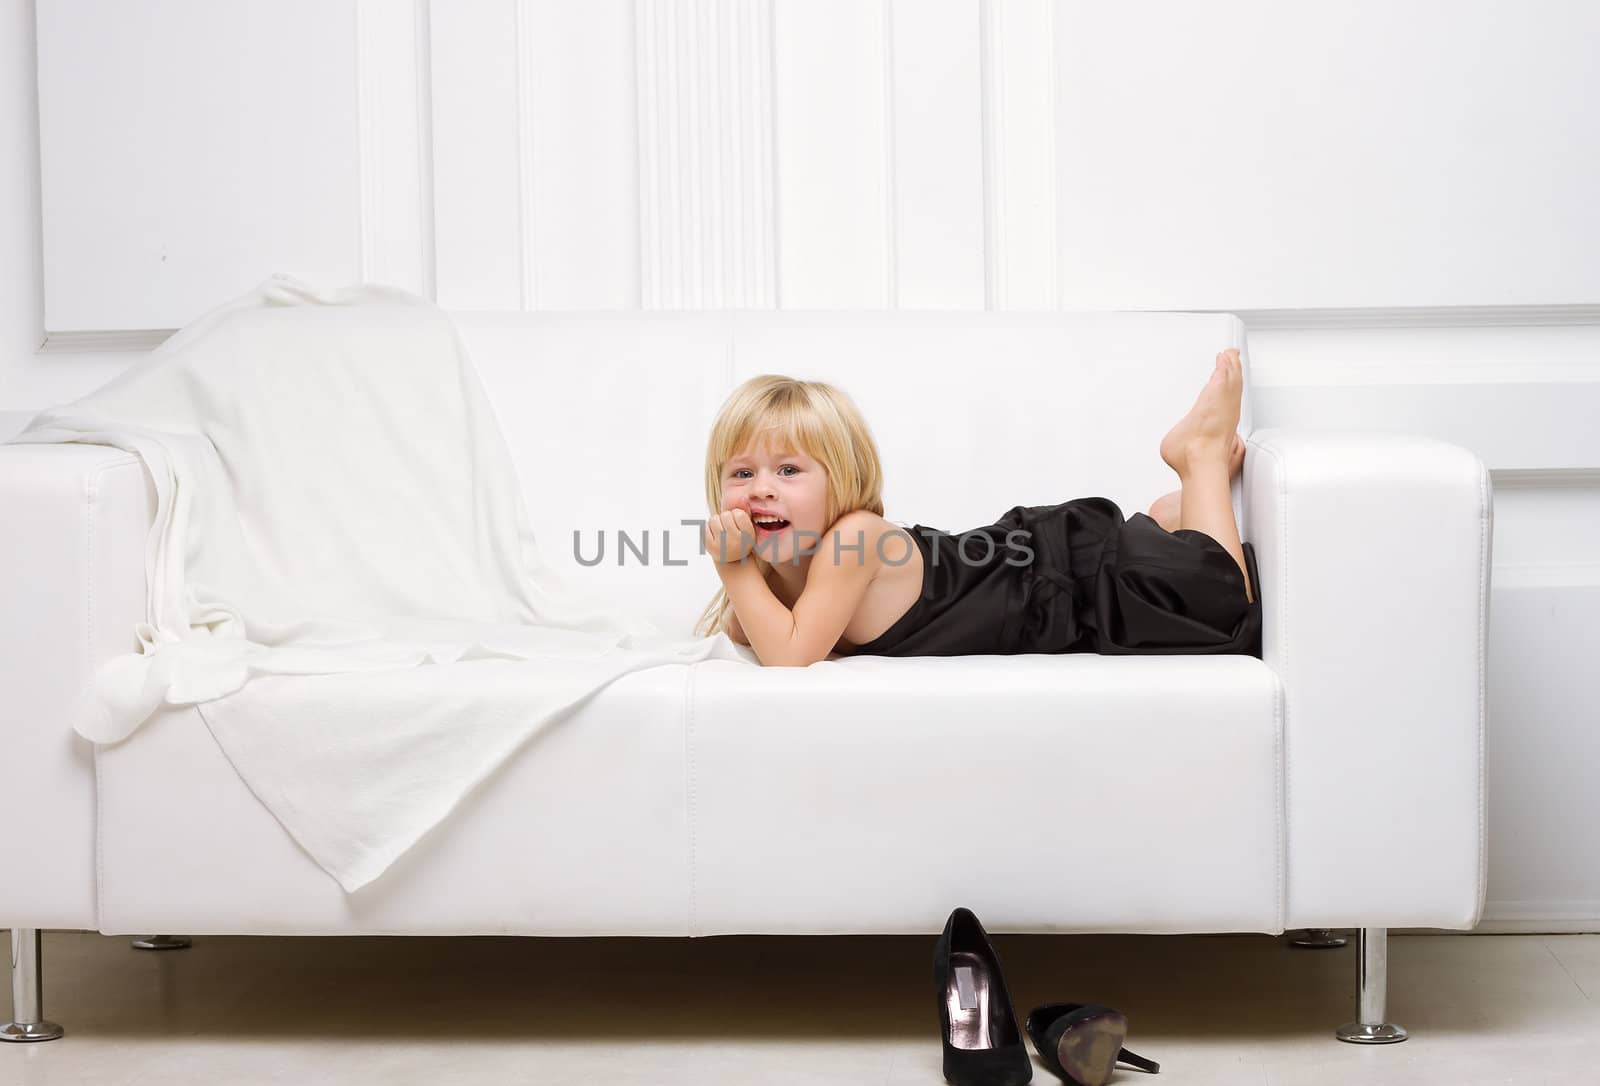 3 years old girl lying on a white sofa in my mother's dress, standing next high heels